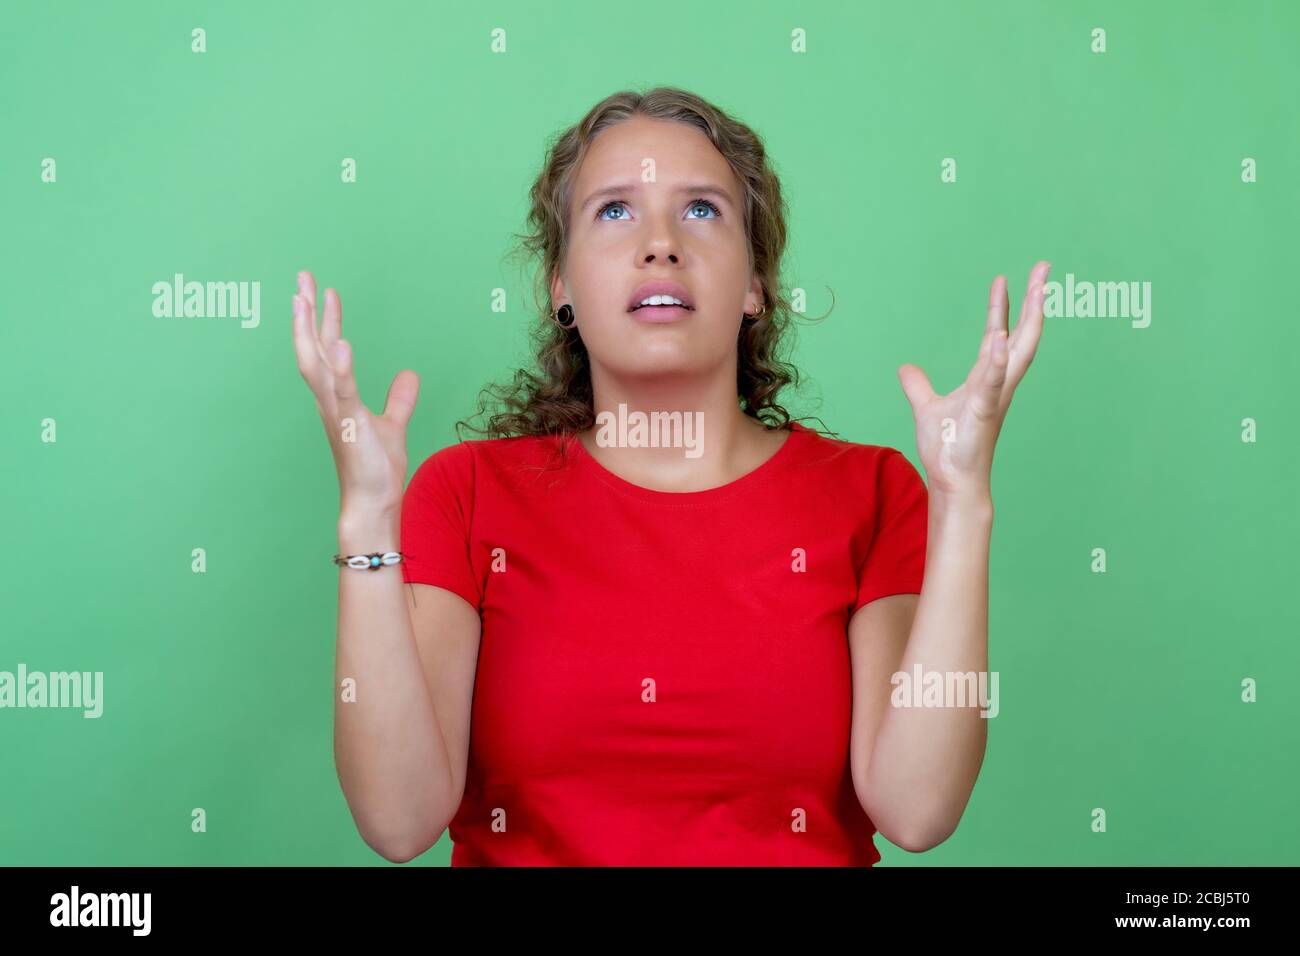 Angry and stressed blond woman with red shirt isolated on green background Stock Photo